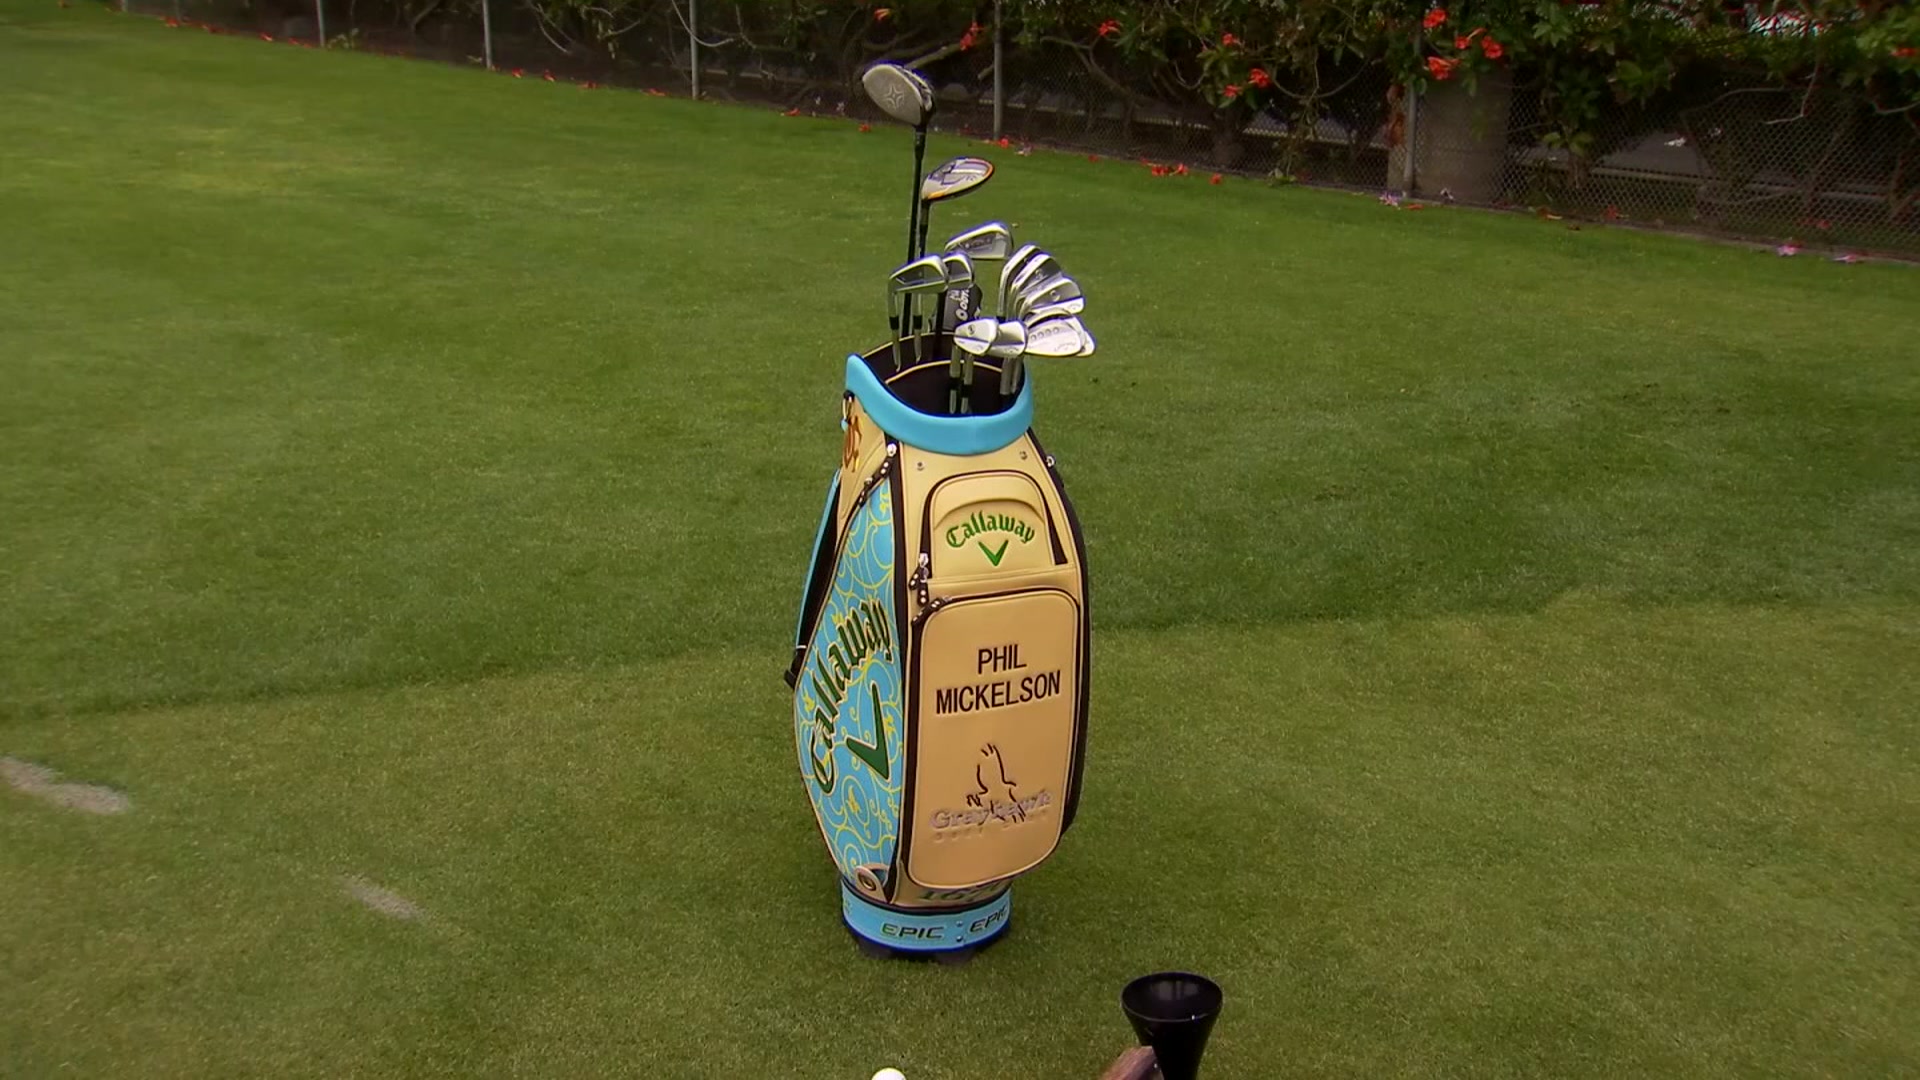 Skynd dig Forfalske Variant What Is in Phil Mickelson's Bag? – NBC 7 San Diego